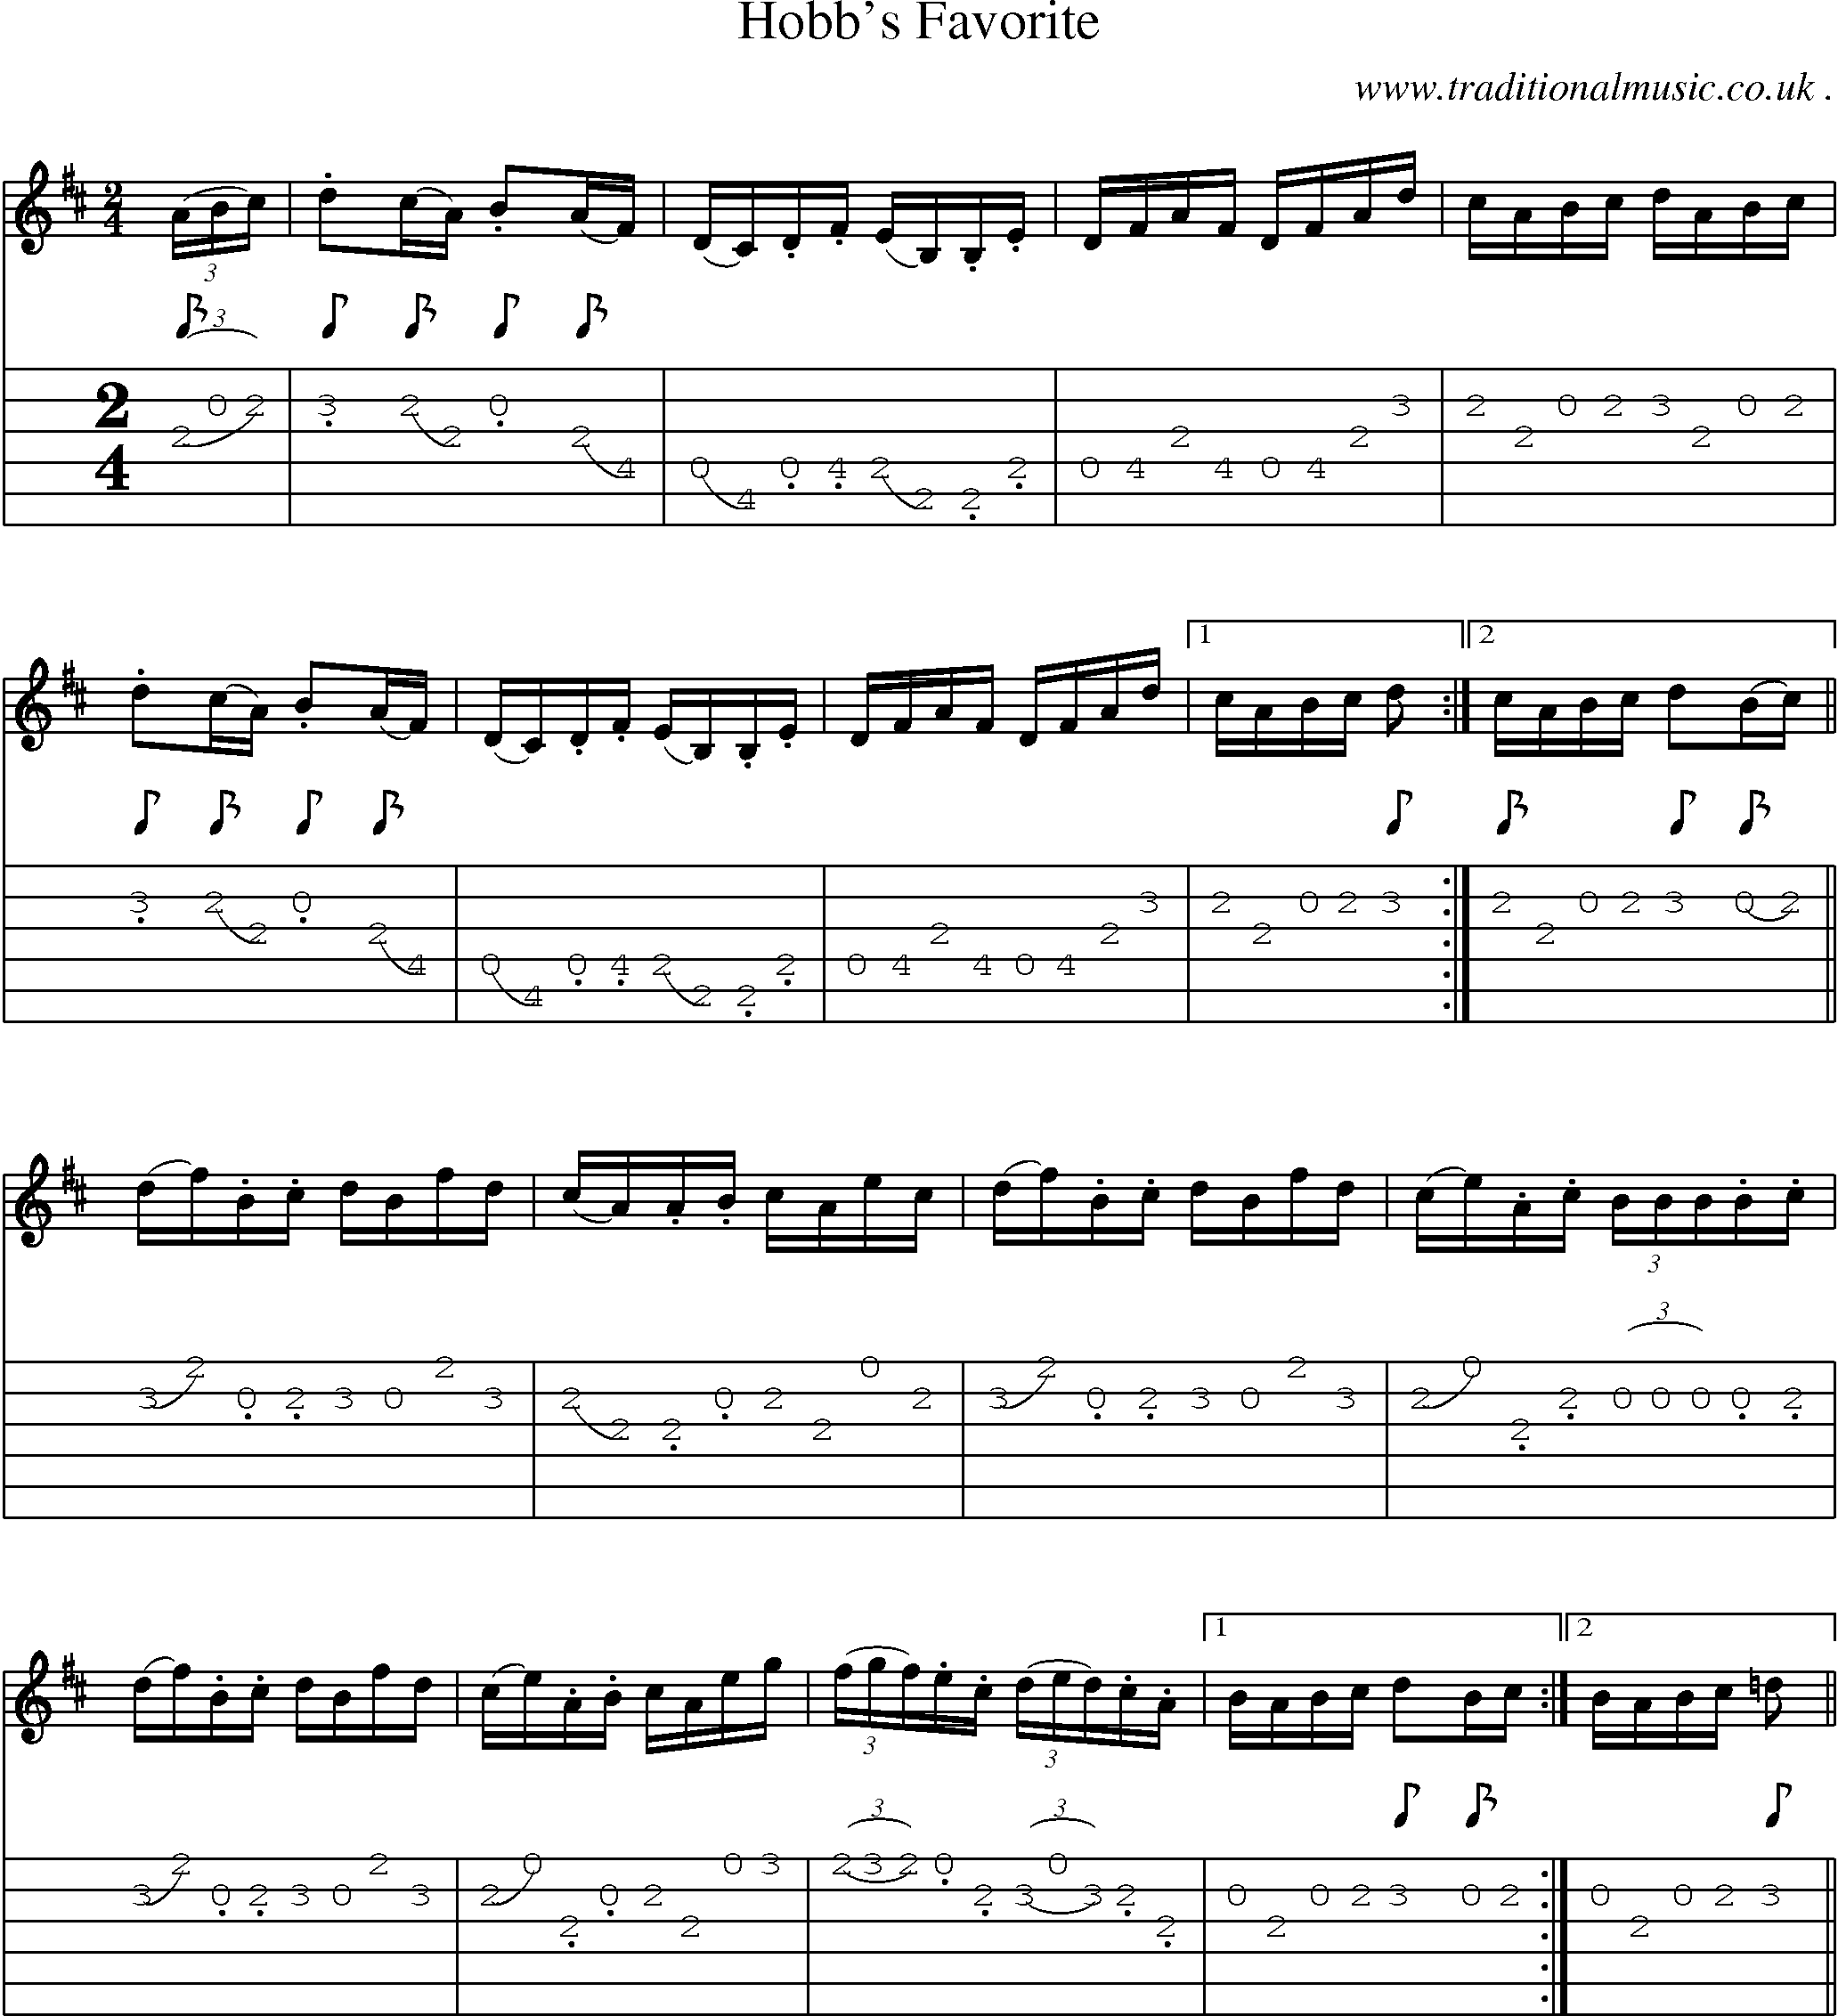 Sheet-Music and Guitar Tabs for Hobbs Favorite